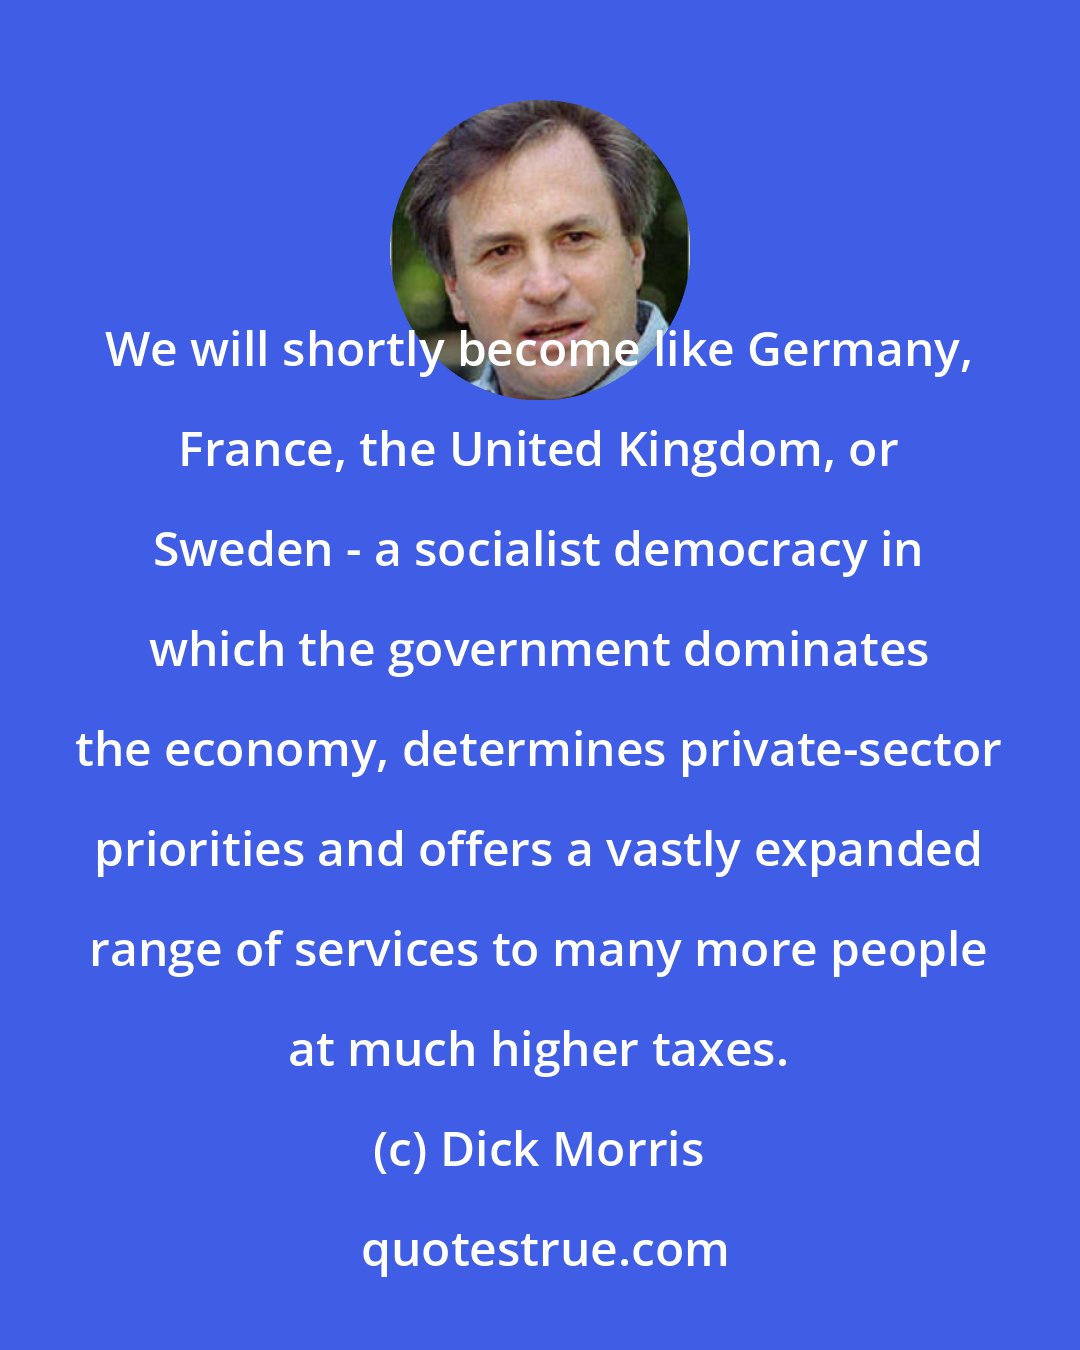 Dick Morris: We will shortly become like Germany, France, the United Kingdom, or Sweden - a socialist democracy in which the government dominates the economy, determines private-sector priorities and offers a vastly expanded range of services to many more people at much higher taxes.